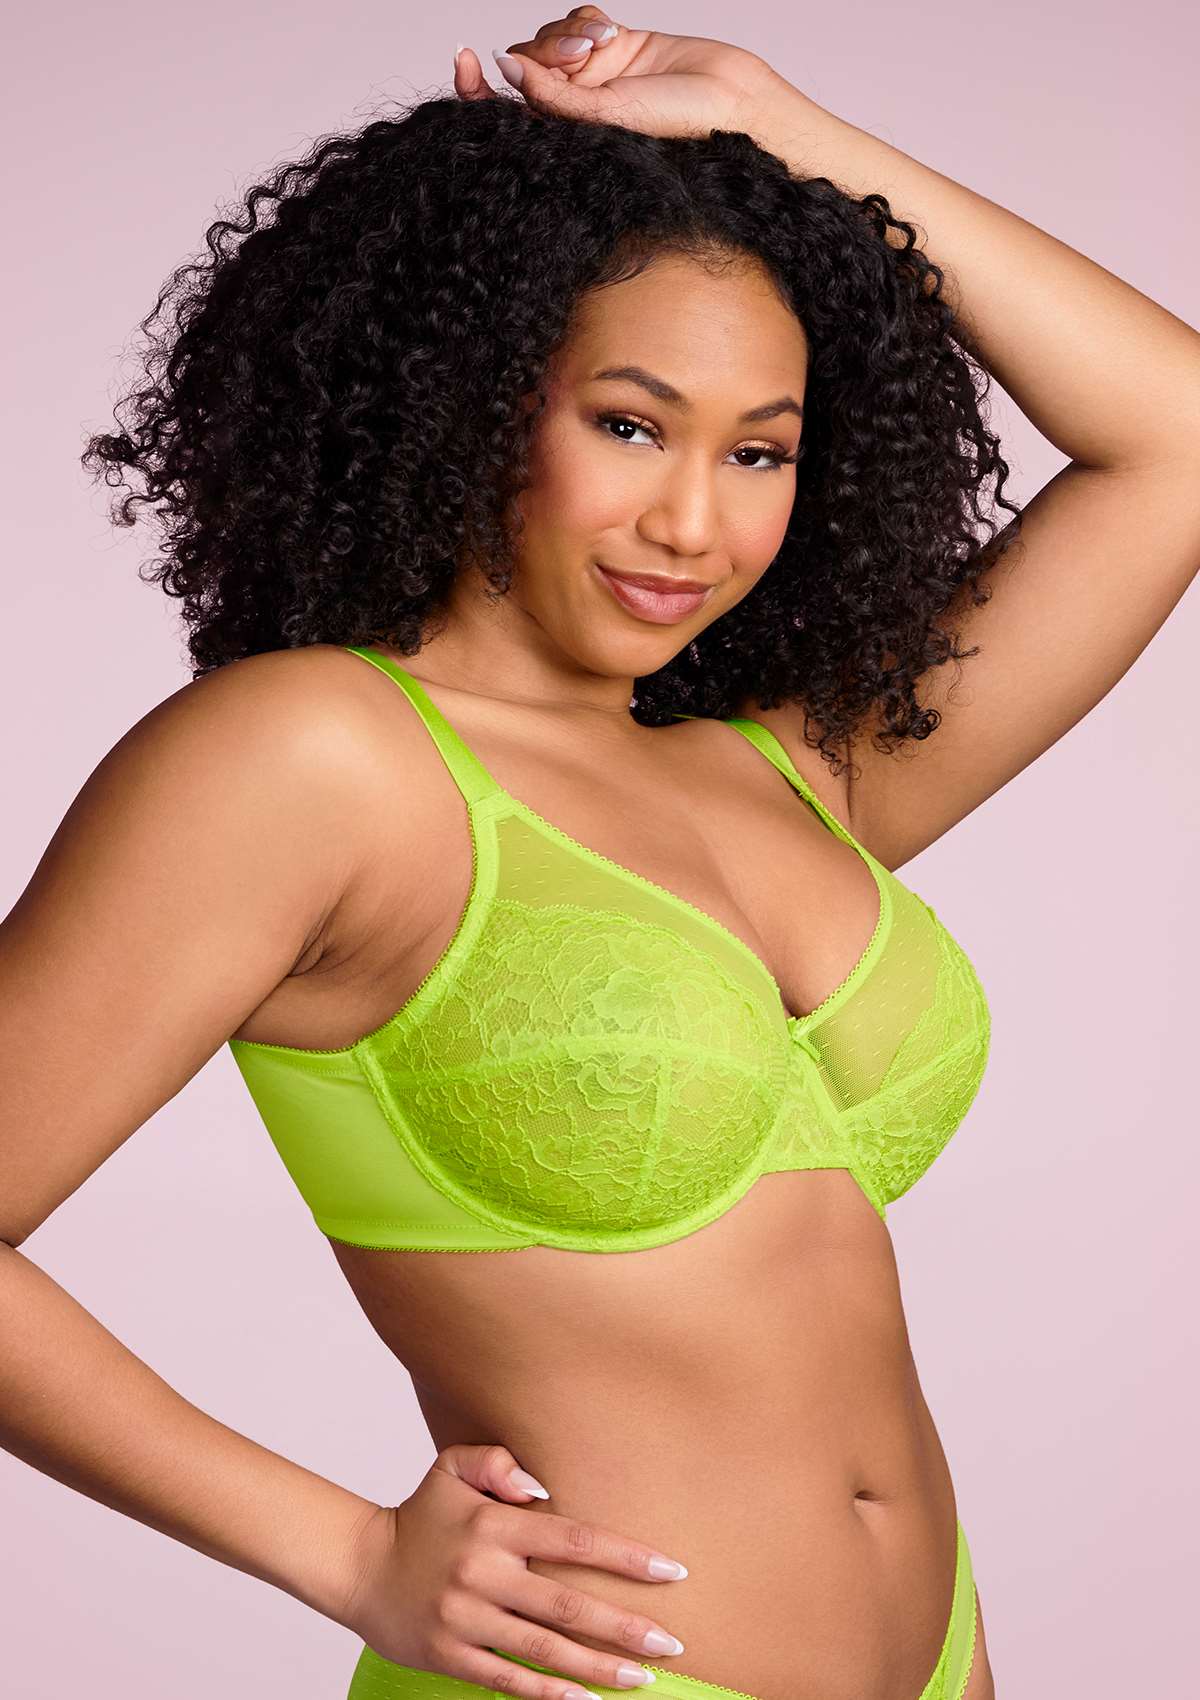 HSIA Enchante Full Cup Minimizing Bra: Supportive Unlined Lace Bra - Lime Green / 34 / C